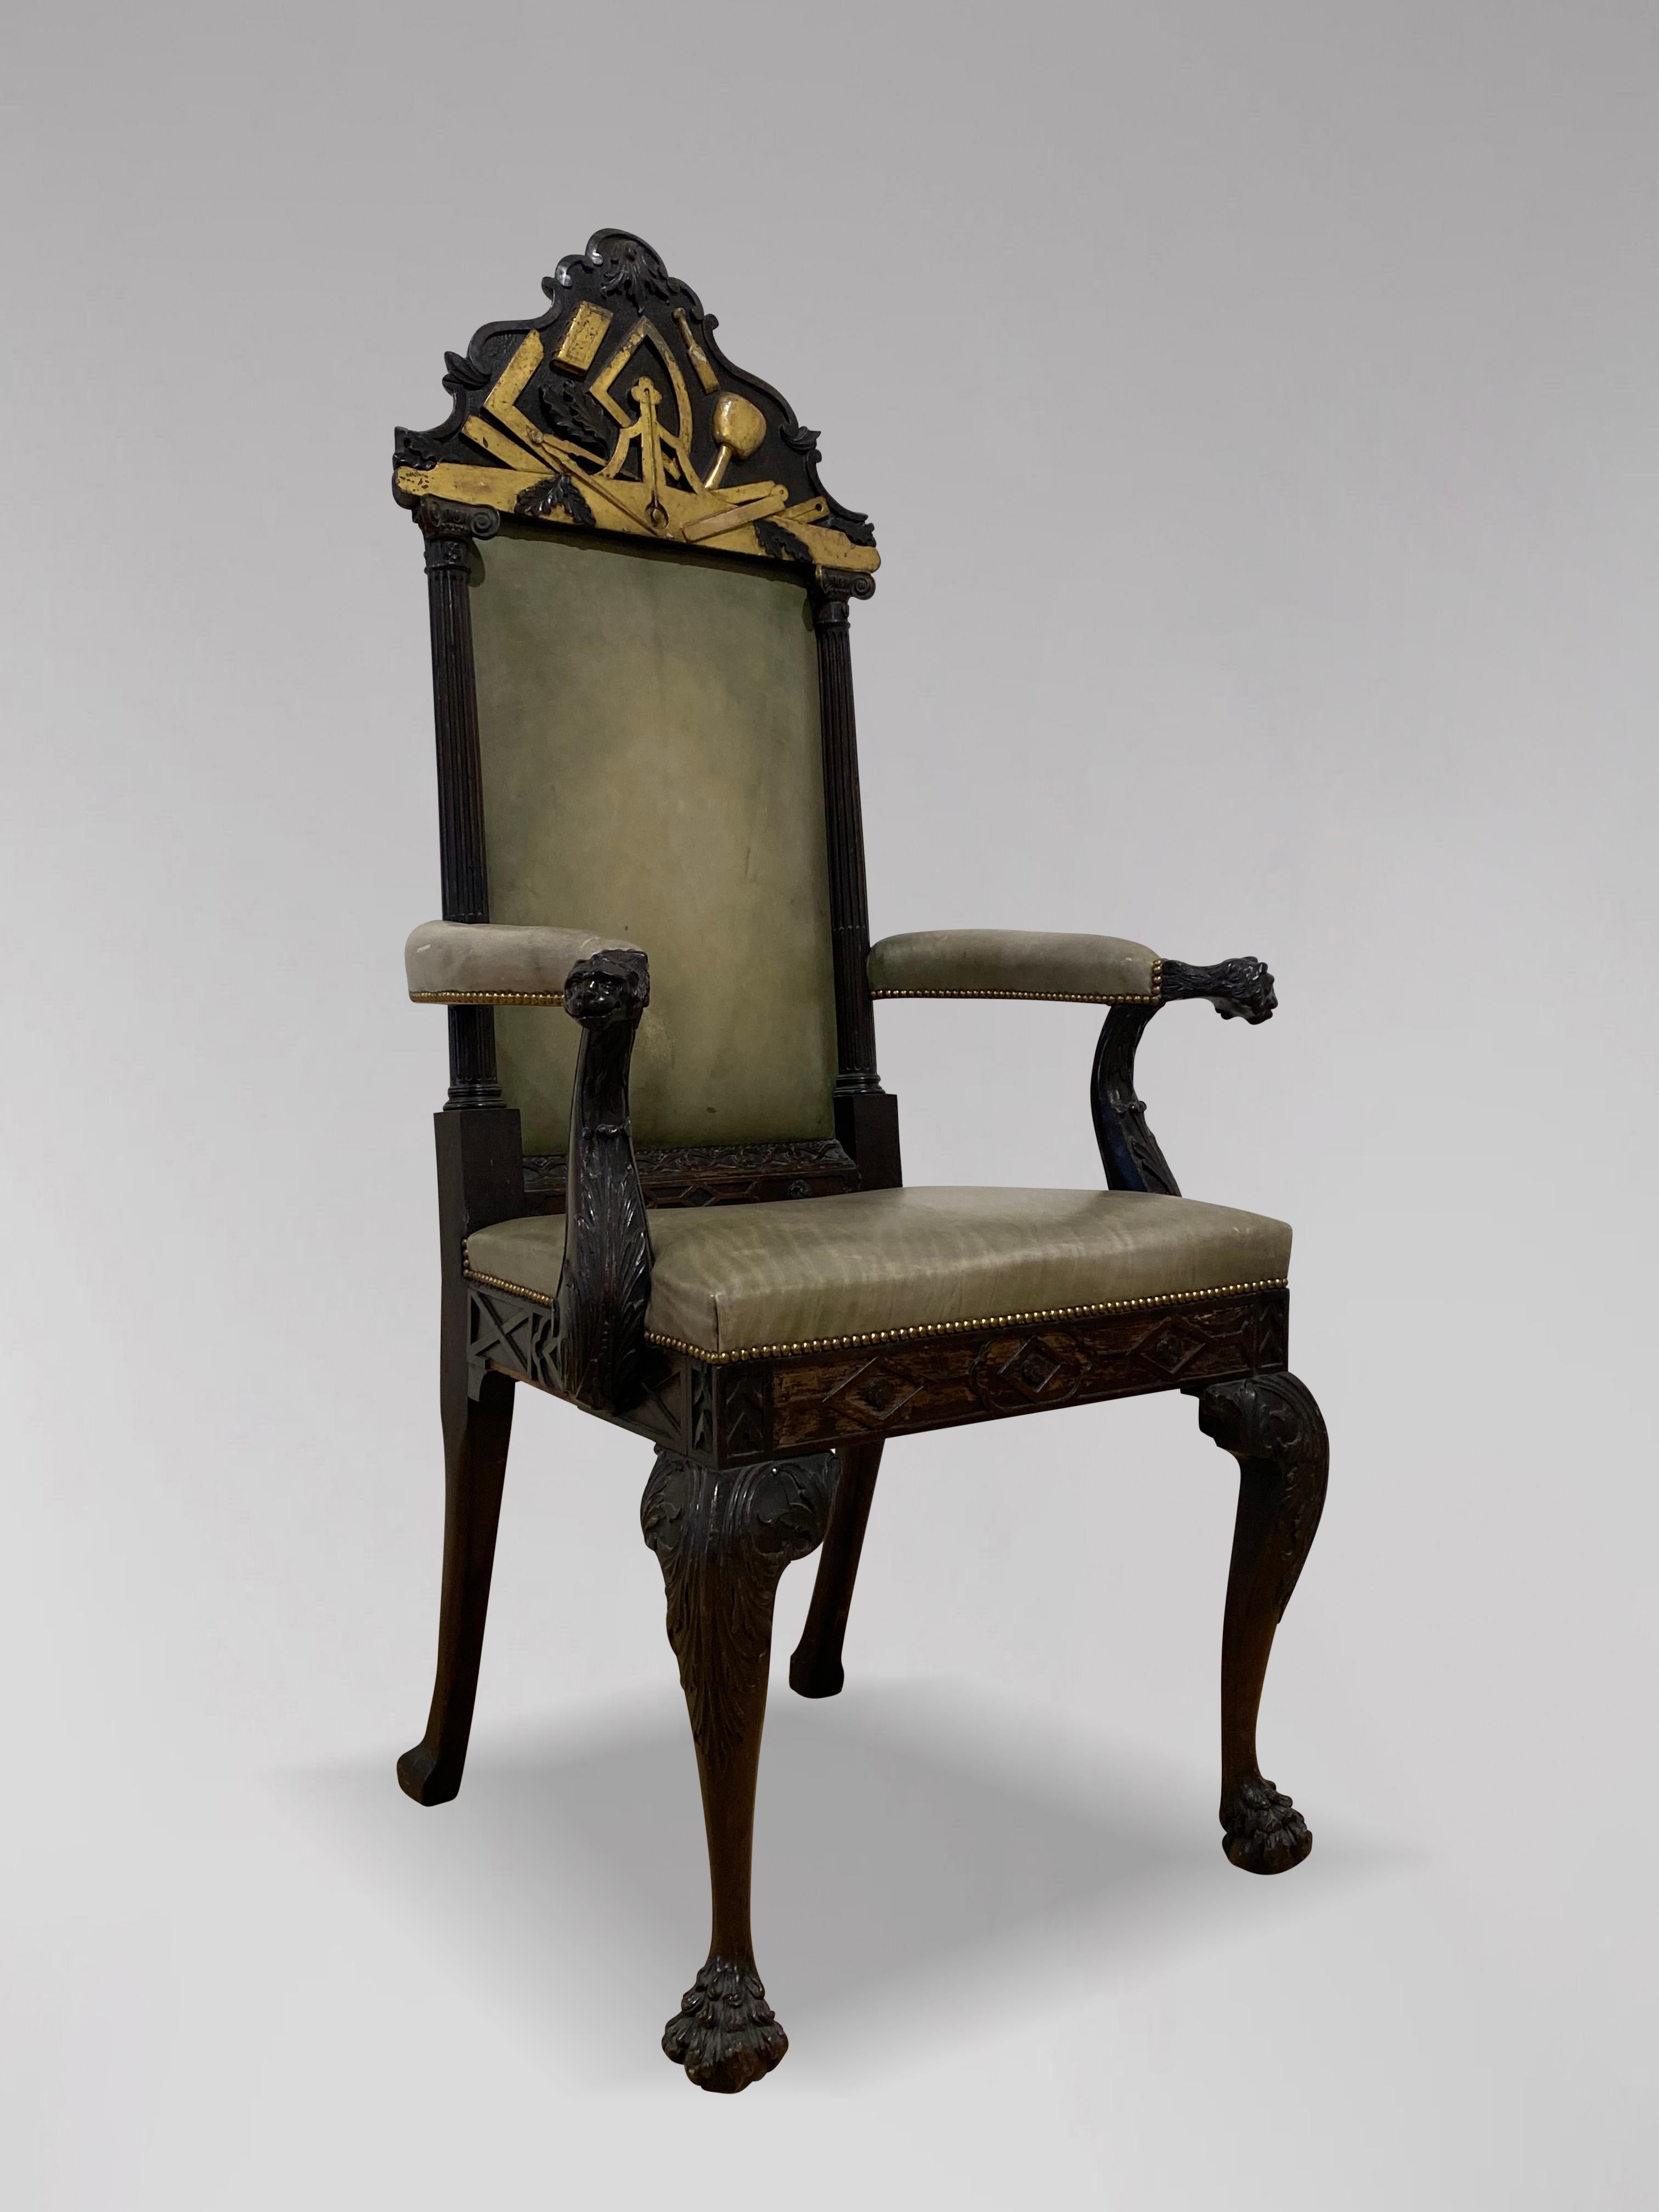 An impressive tall 19th century mahogany, partly gilt masonic throne armchair. The high back with carved and gilt masonic shaped plaques above a green leather back with Corinthian columns to each side, flanked by arms with upholstered green leather